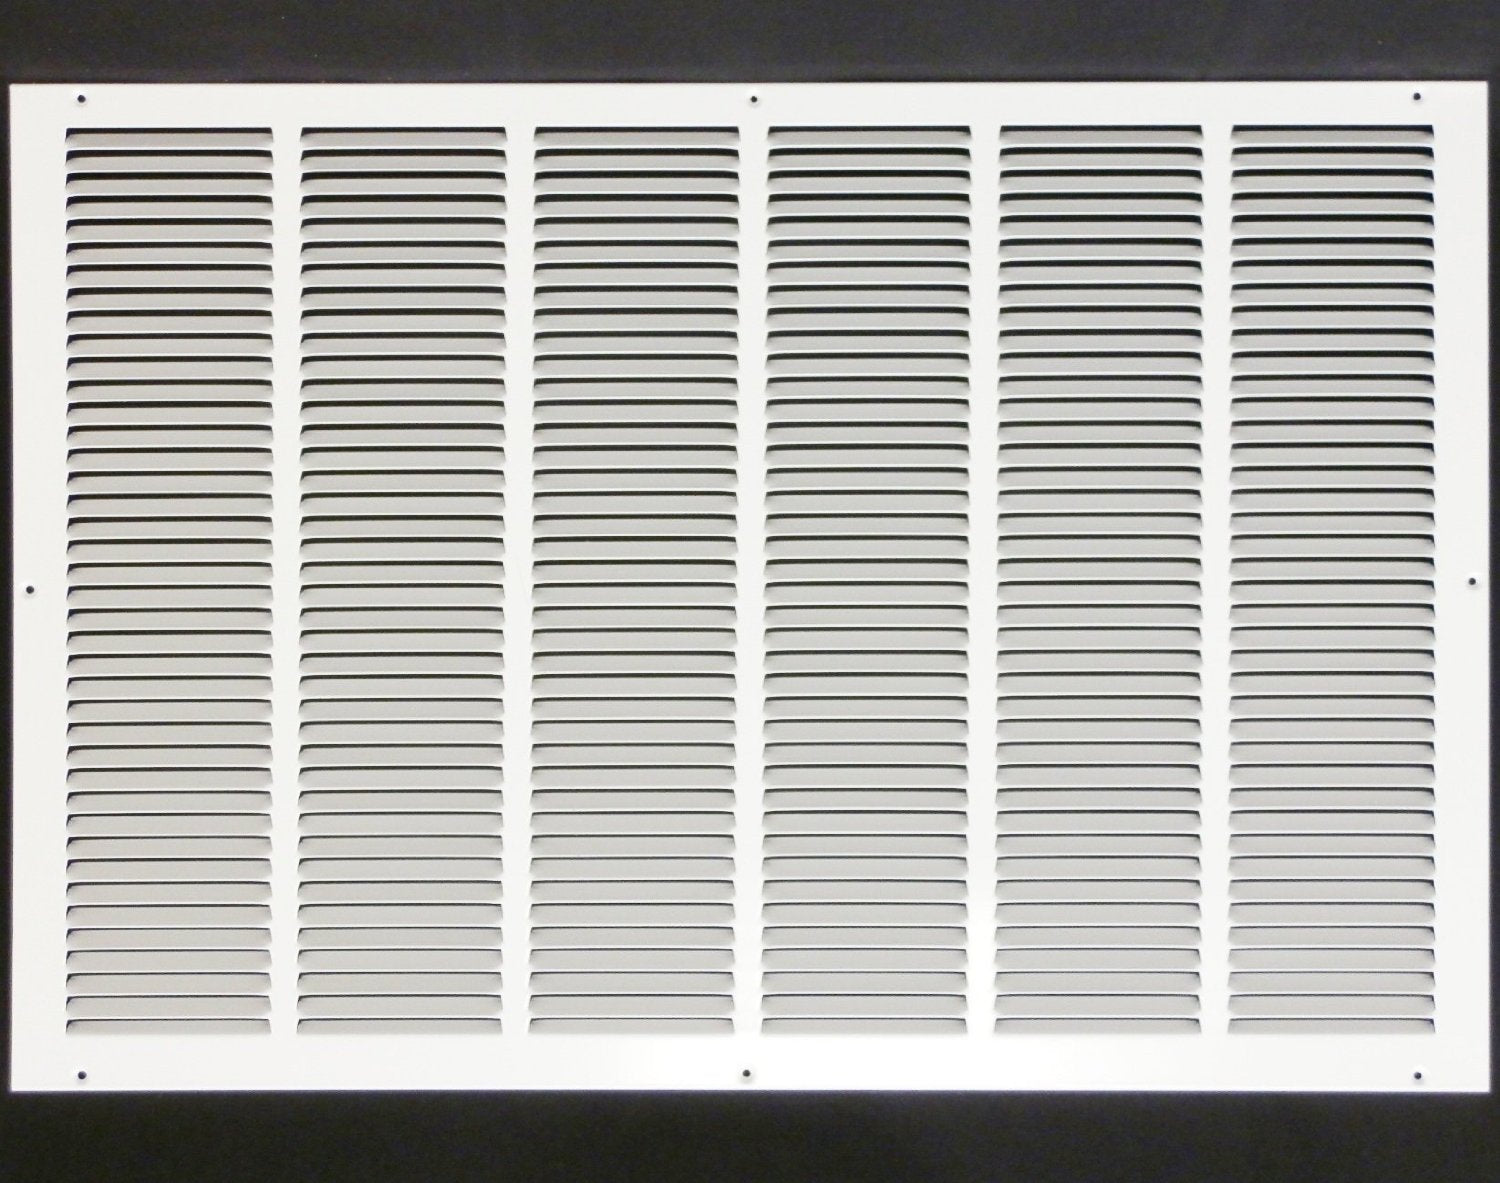 30" X 18" Air Vent Return Grilles - Sidewall and Ceiling - Steel